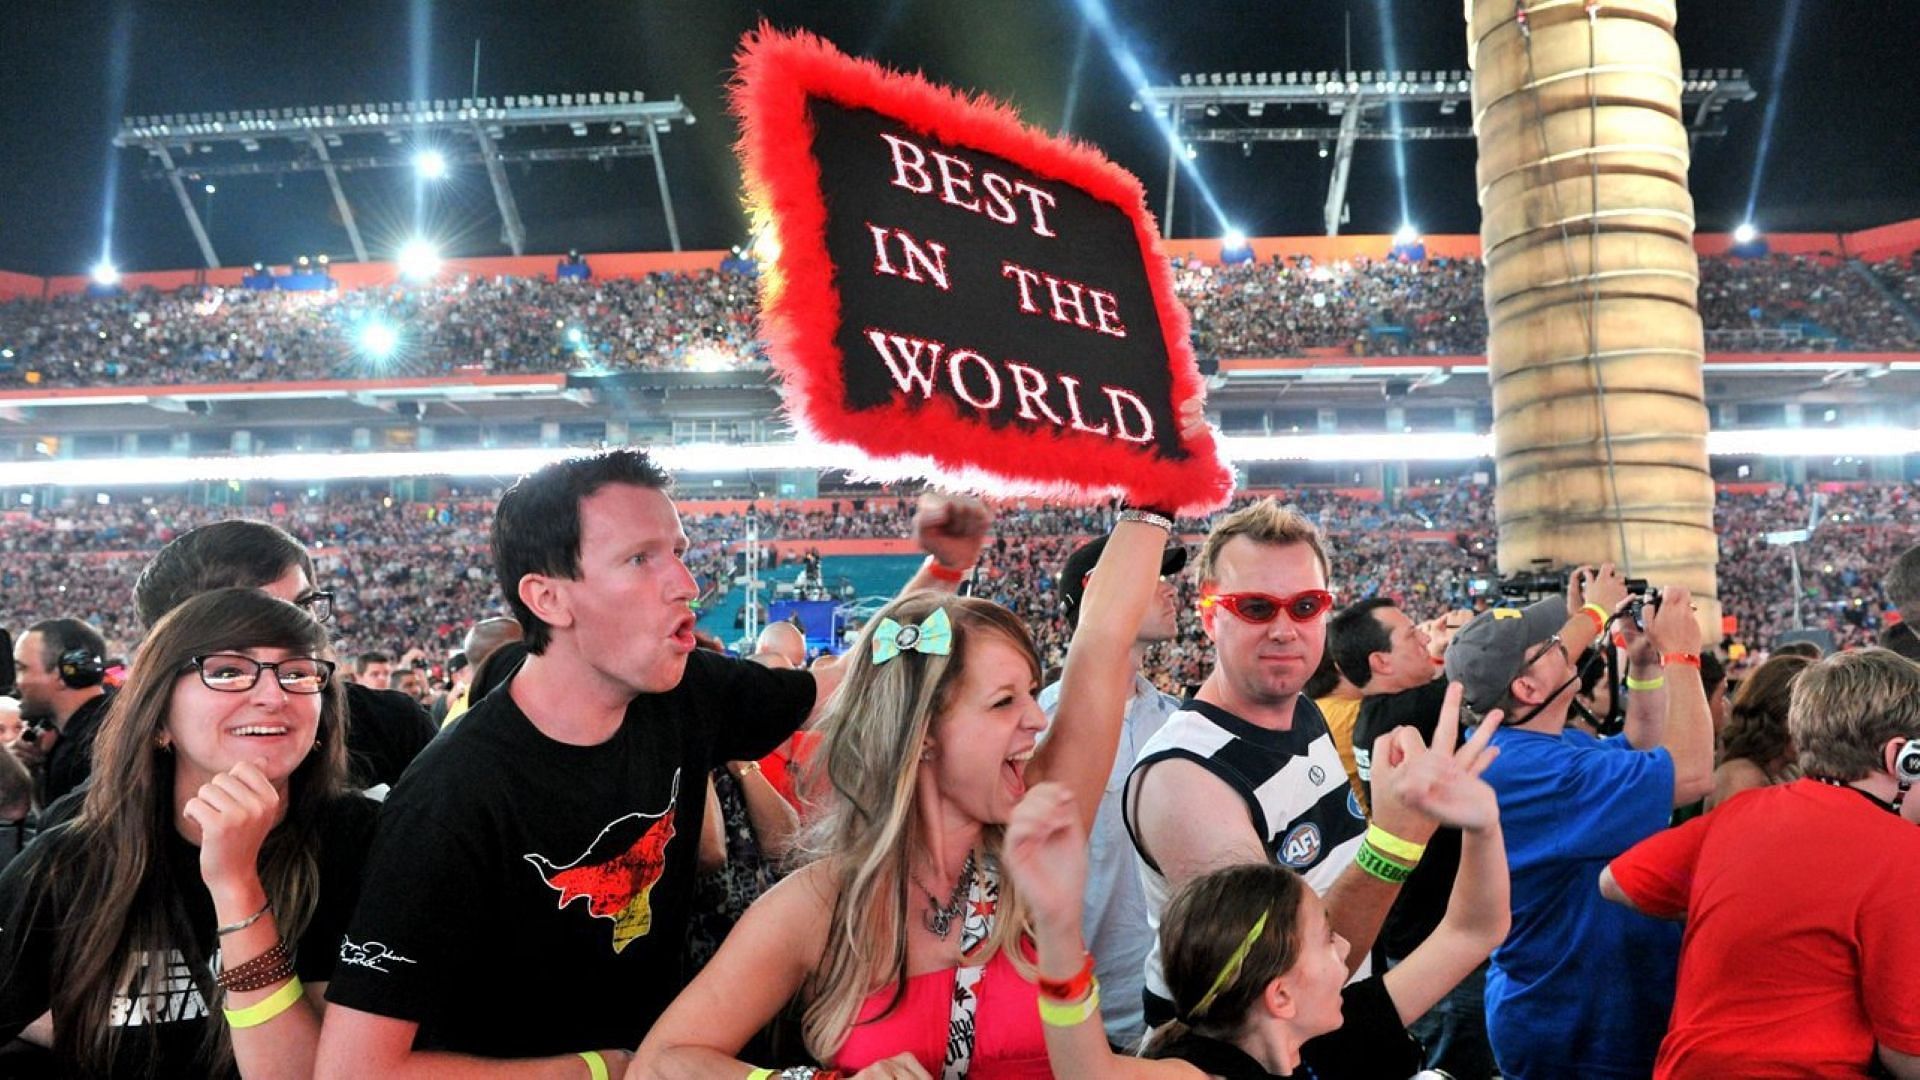 WWE fans cheer their favorites on at WrestleMania